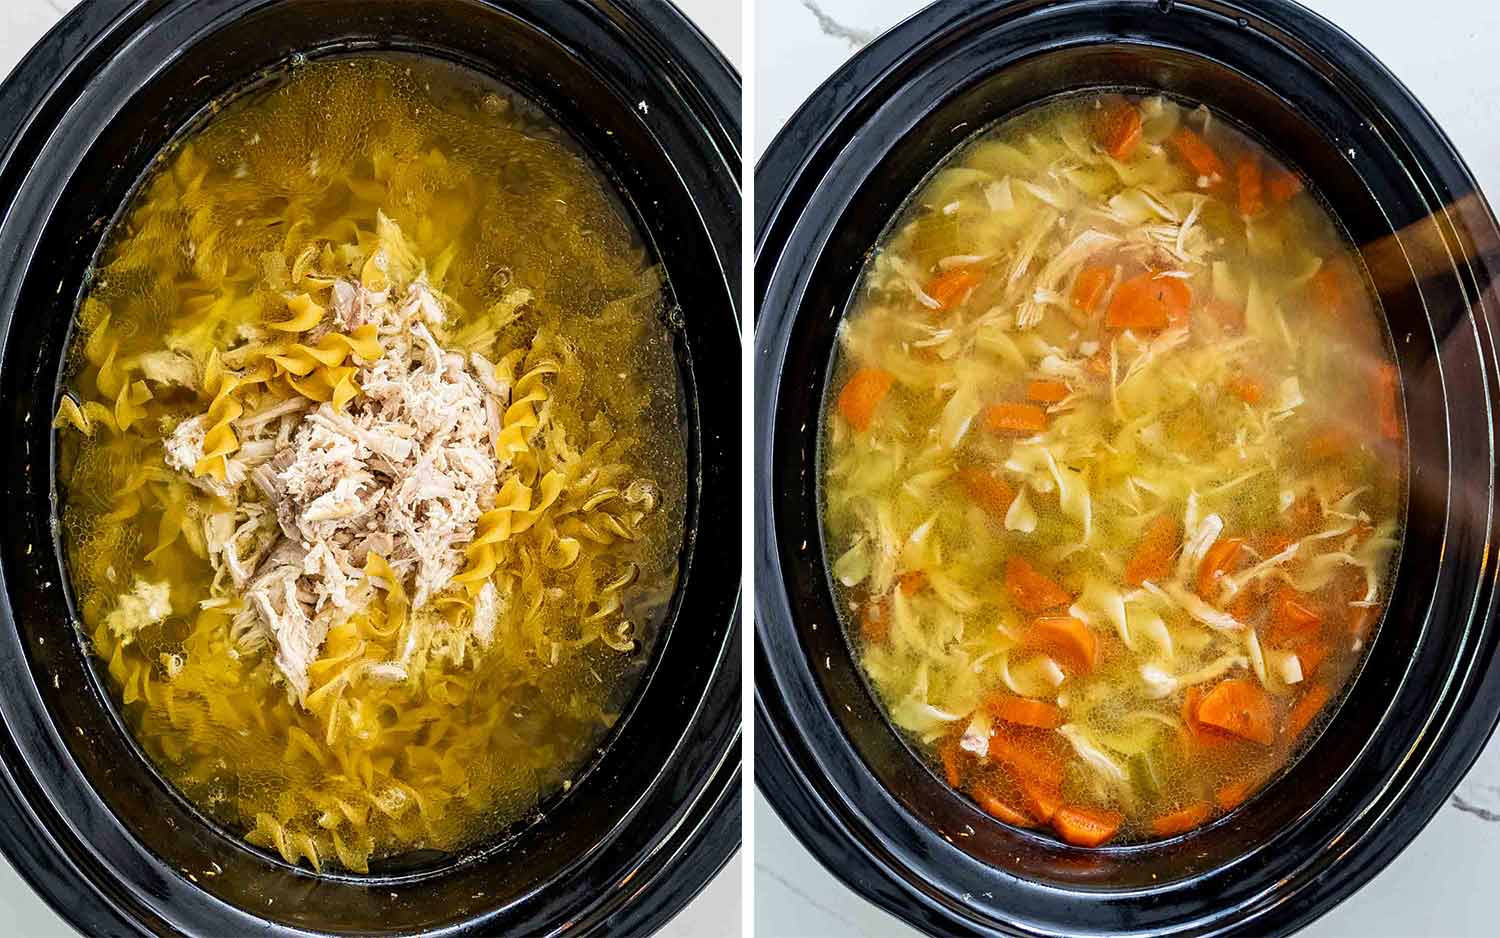 process shots showing how to make chicken noodle soup in a crockpot.